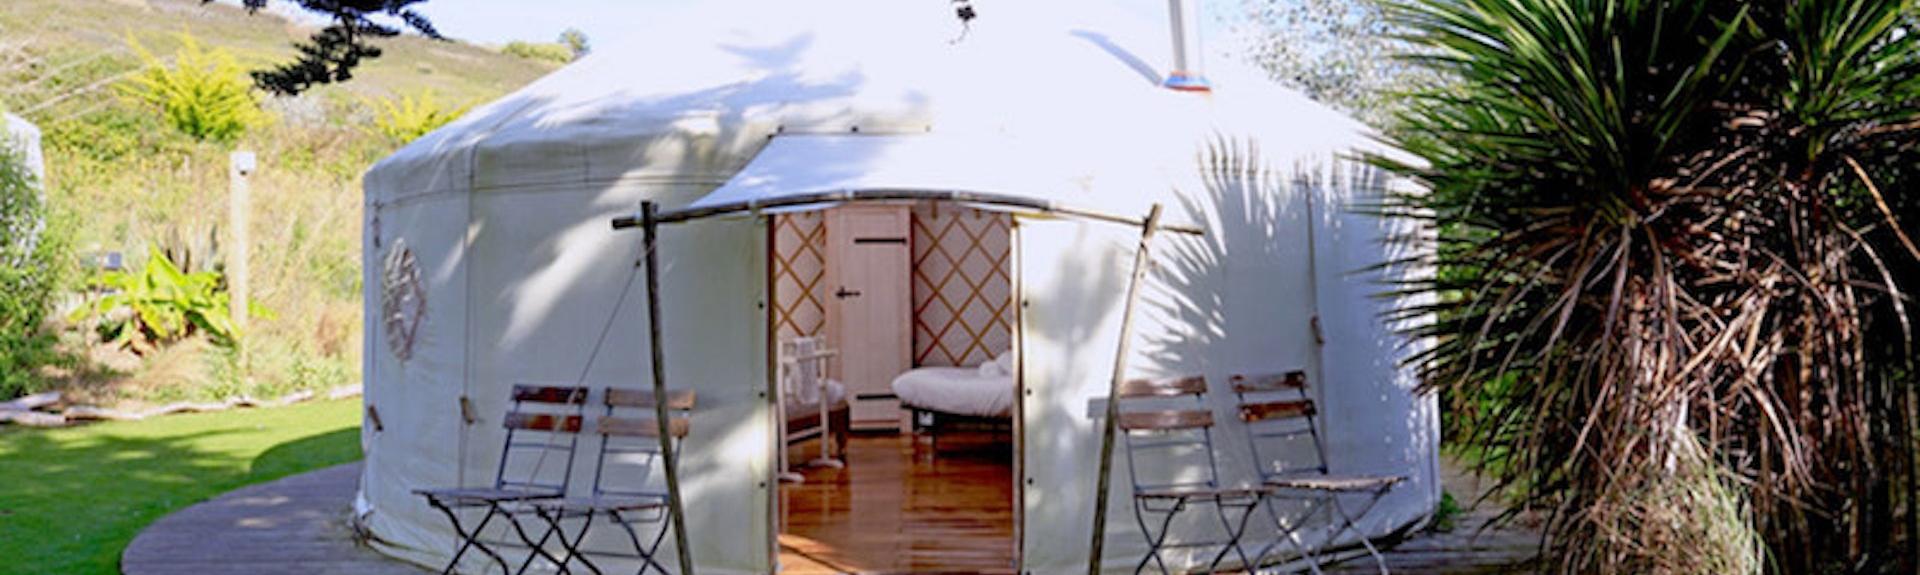 A Cornish eco-yurt with a glimpse of its polished wooden floor and double bed